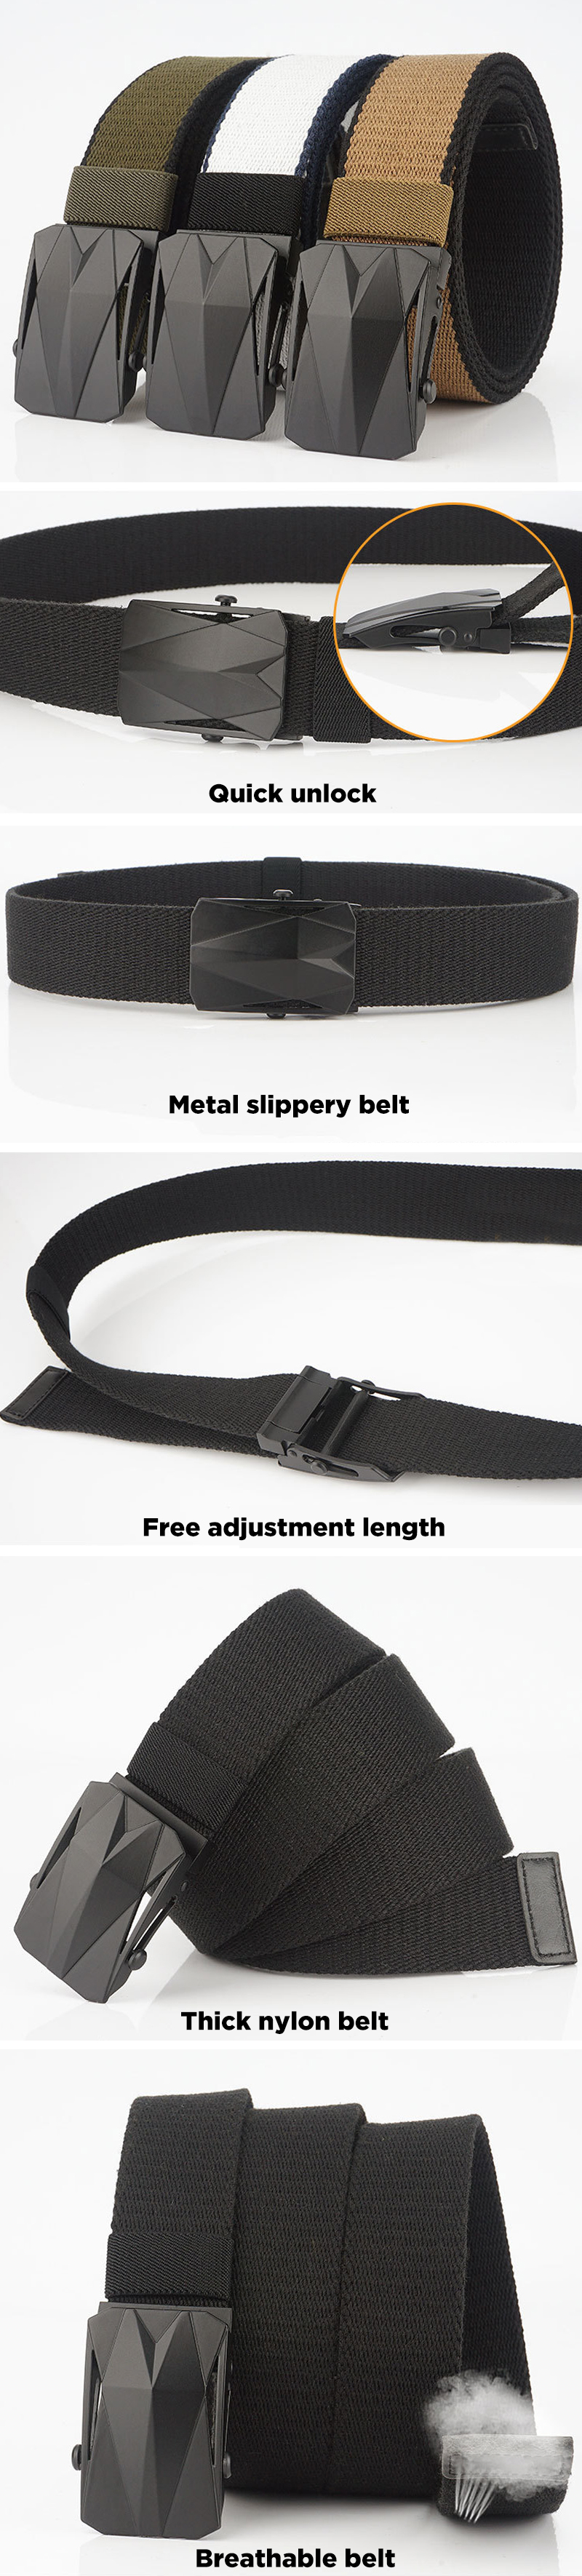 120cm-AWMN-BO03-Punch-Free-Roller-Buckle-Canvas-Tactical-Belt-For-Outdoor-Camping-Hunting-Waistband-1530225-1